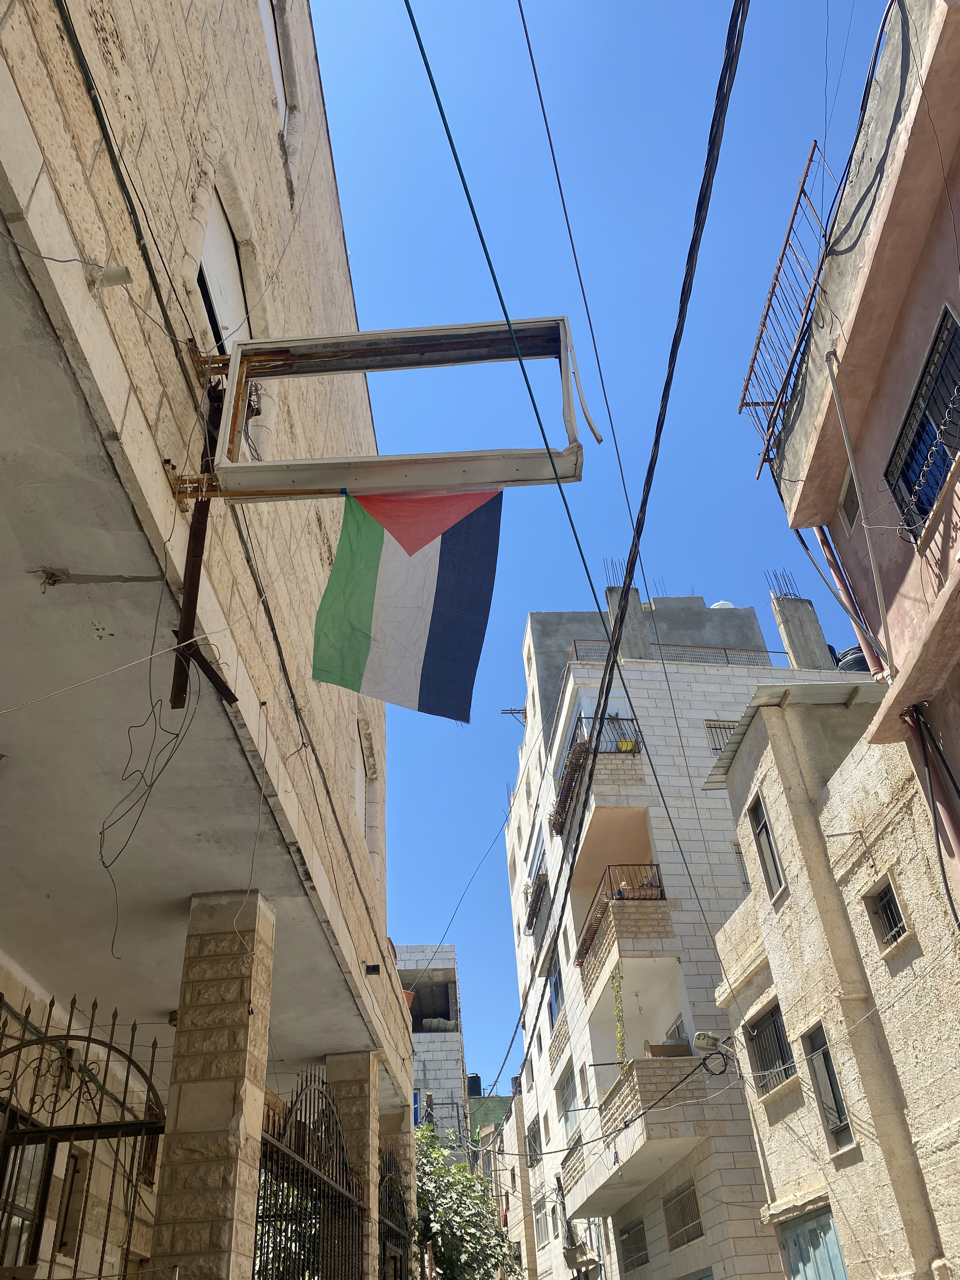 A Palestinian flag hangs from a broken store sign in Aida Refugee Camp, Bethlehem.